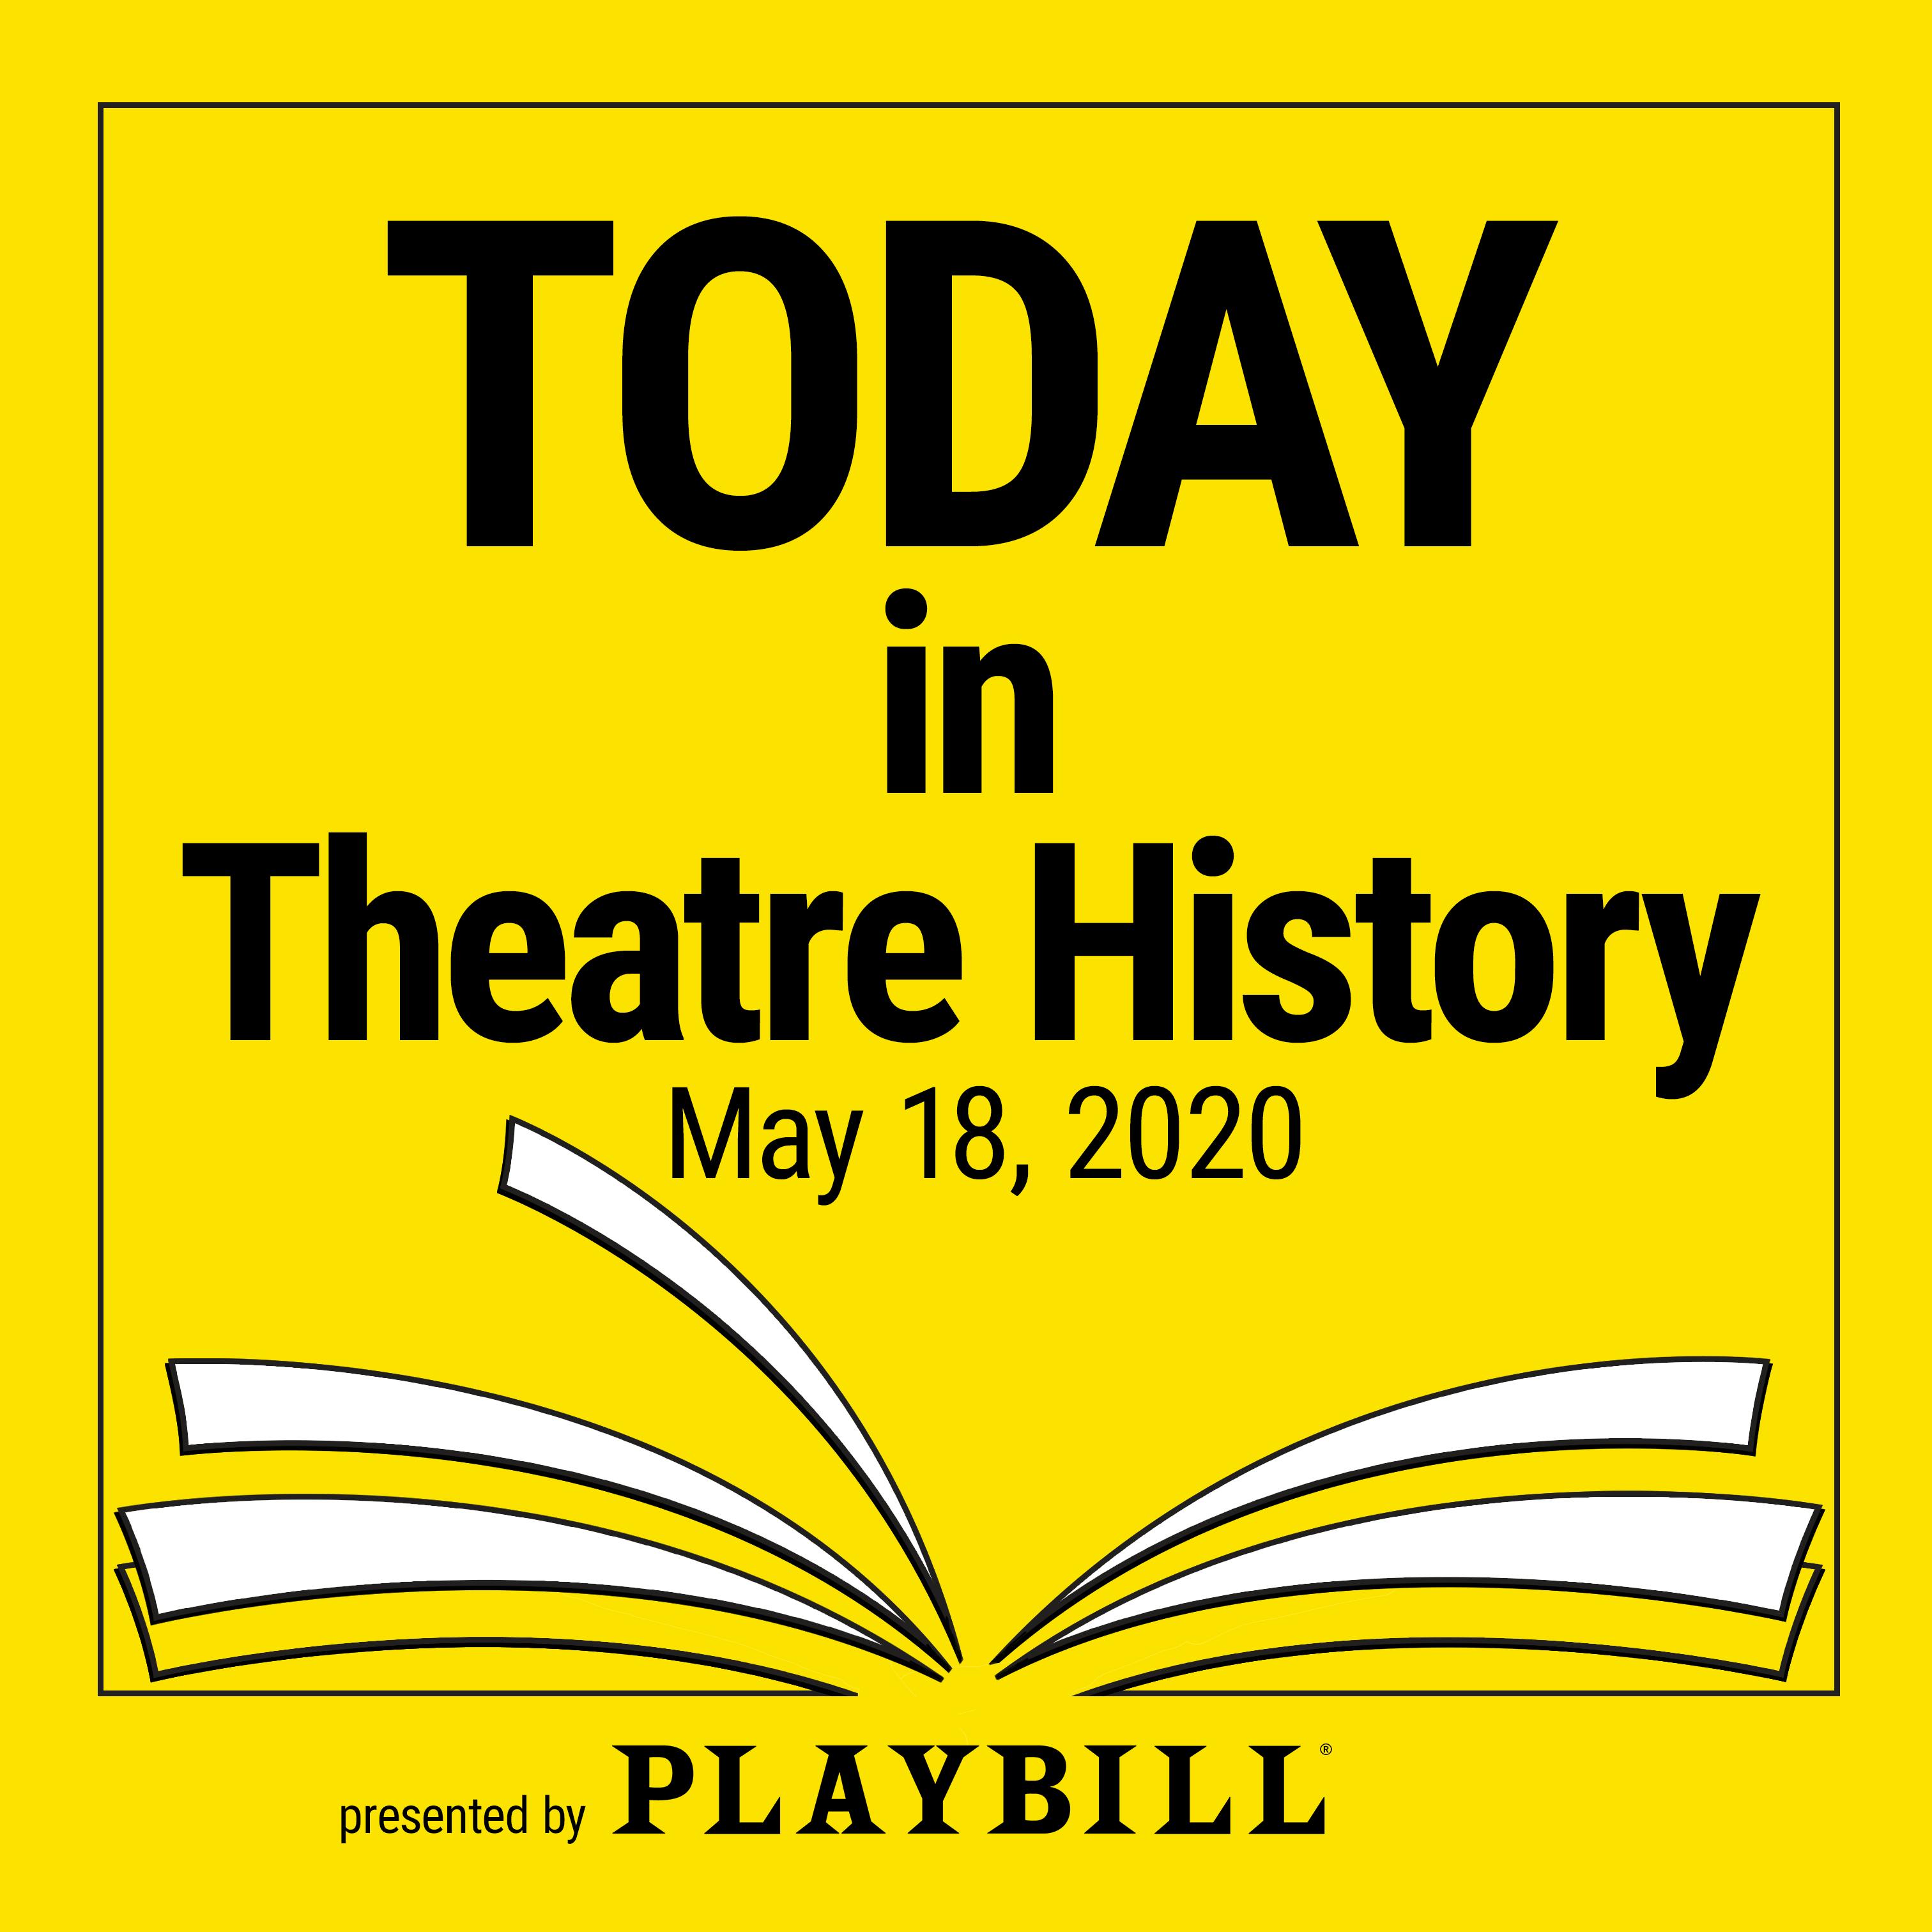 May 18, 2020: Broadway said goodbye (for a very short time) to Les Miserables in 2003